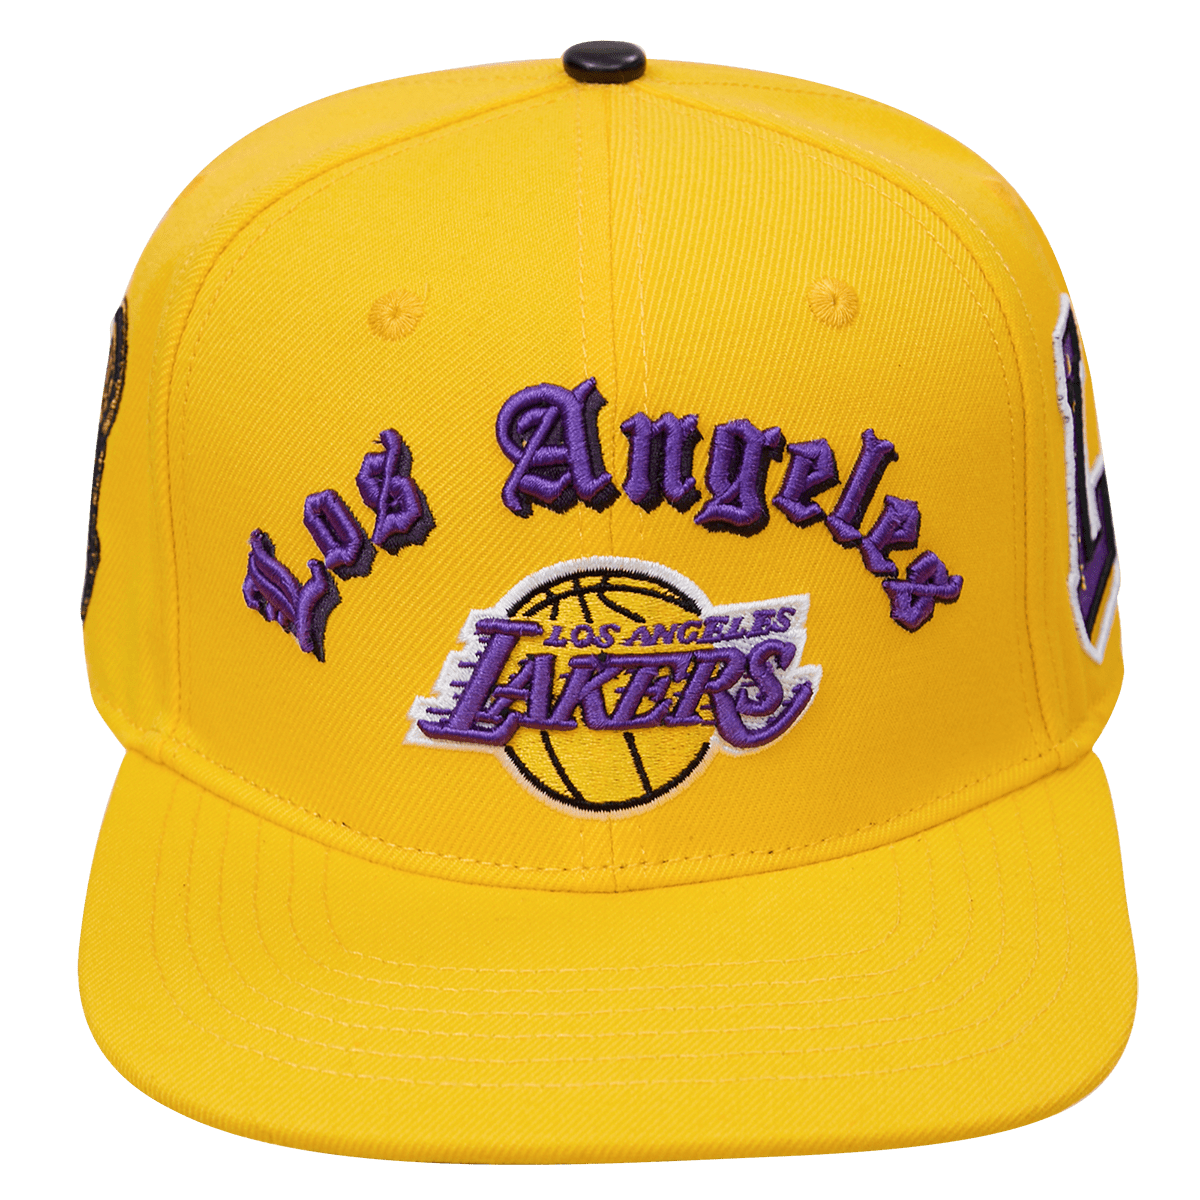 LOS ANGELES LAKERS OLD ENGLISH SNAPBACK HAT (YELLOW)